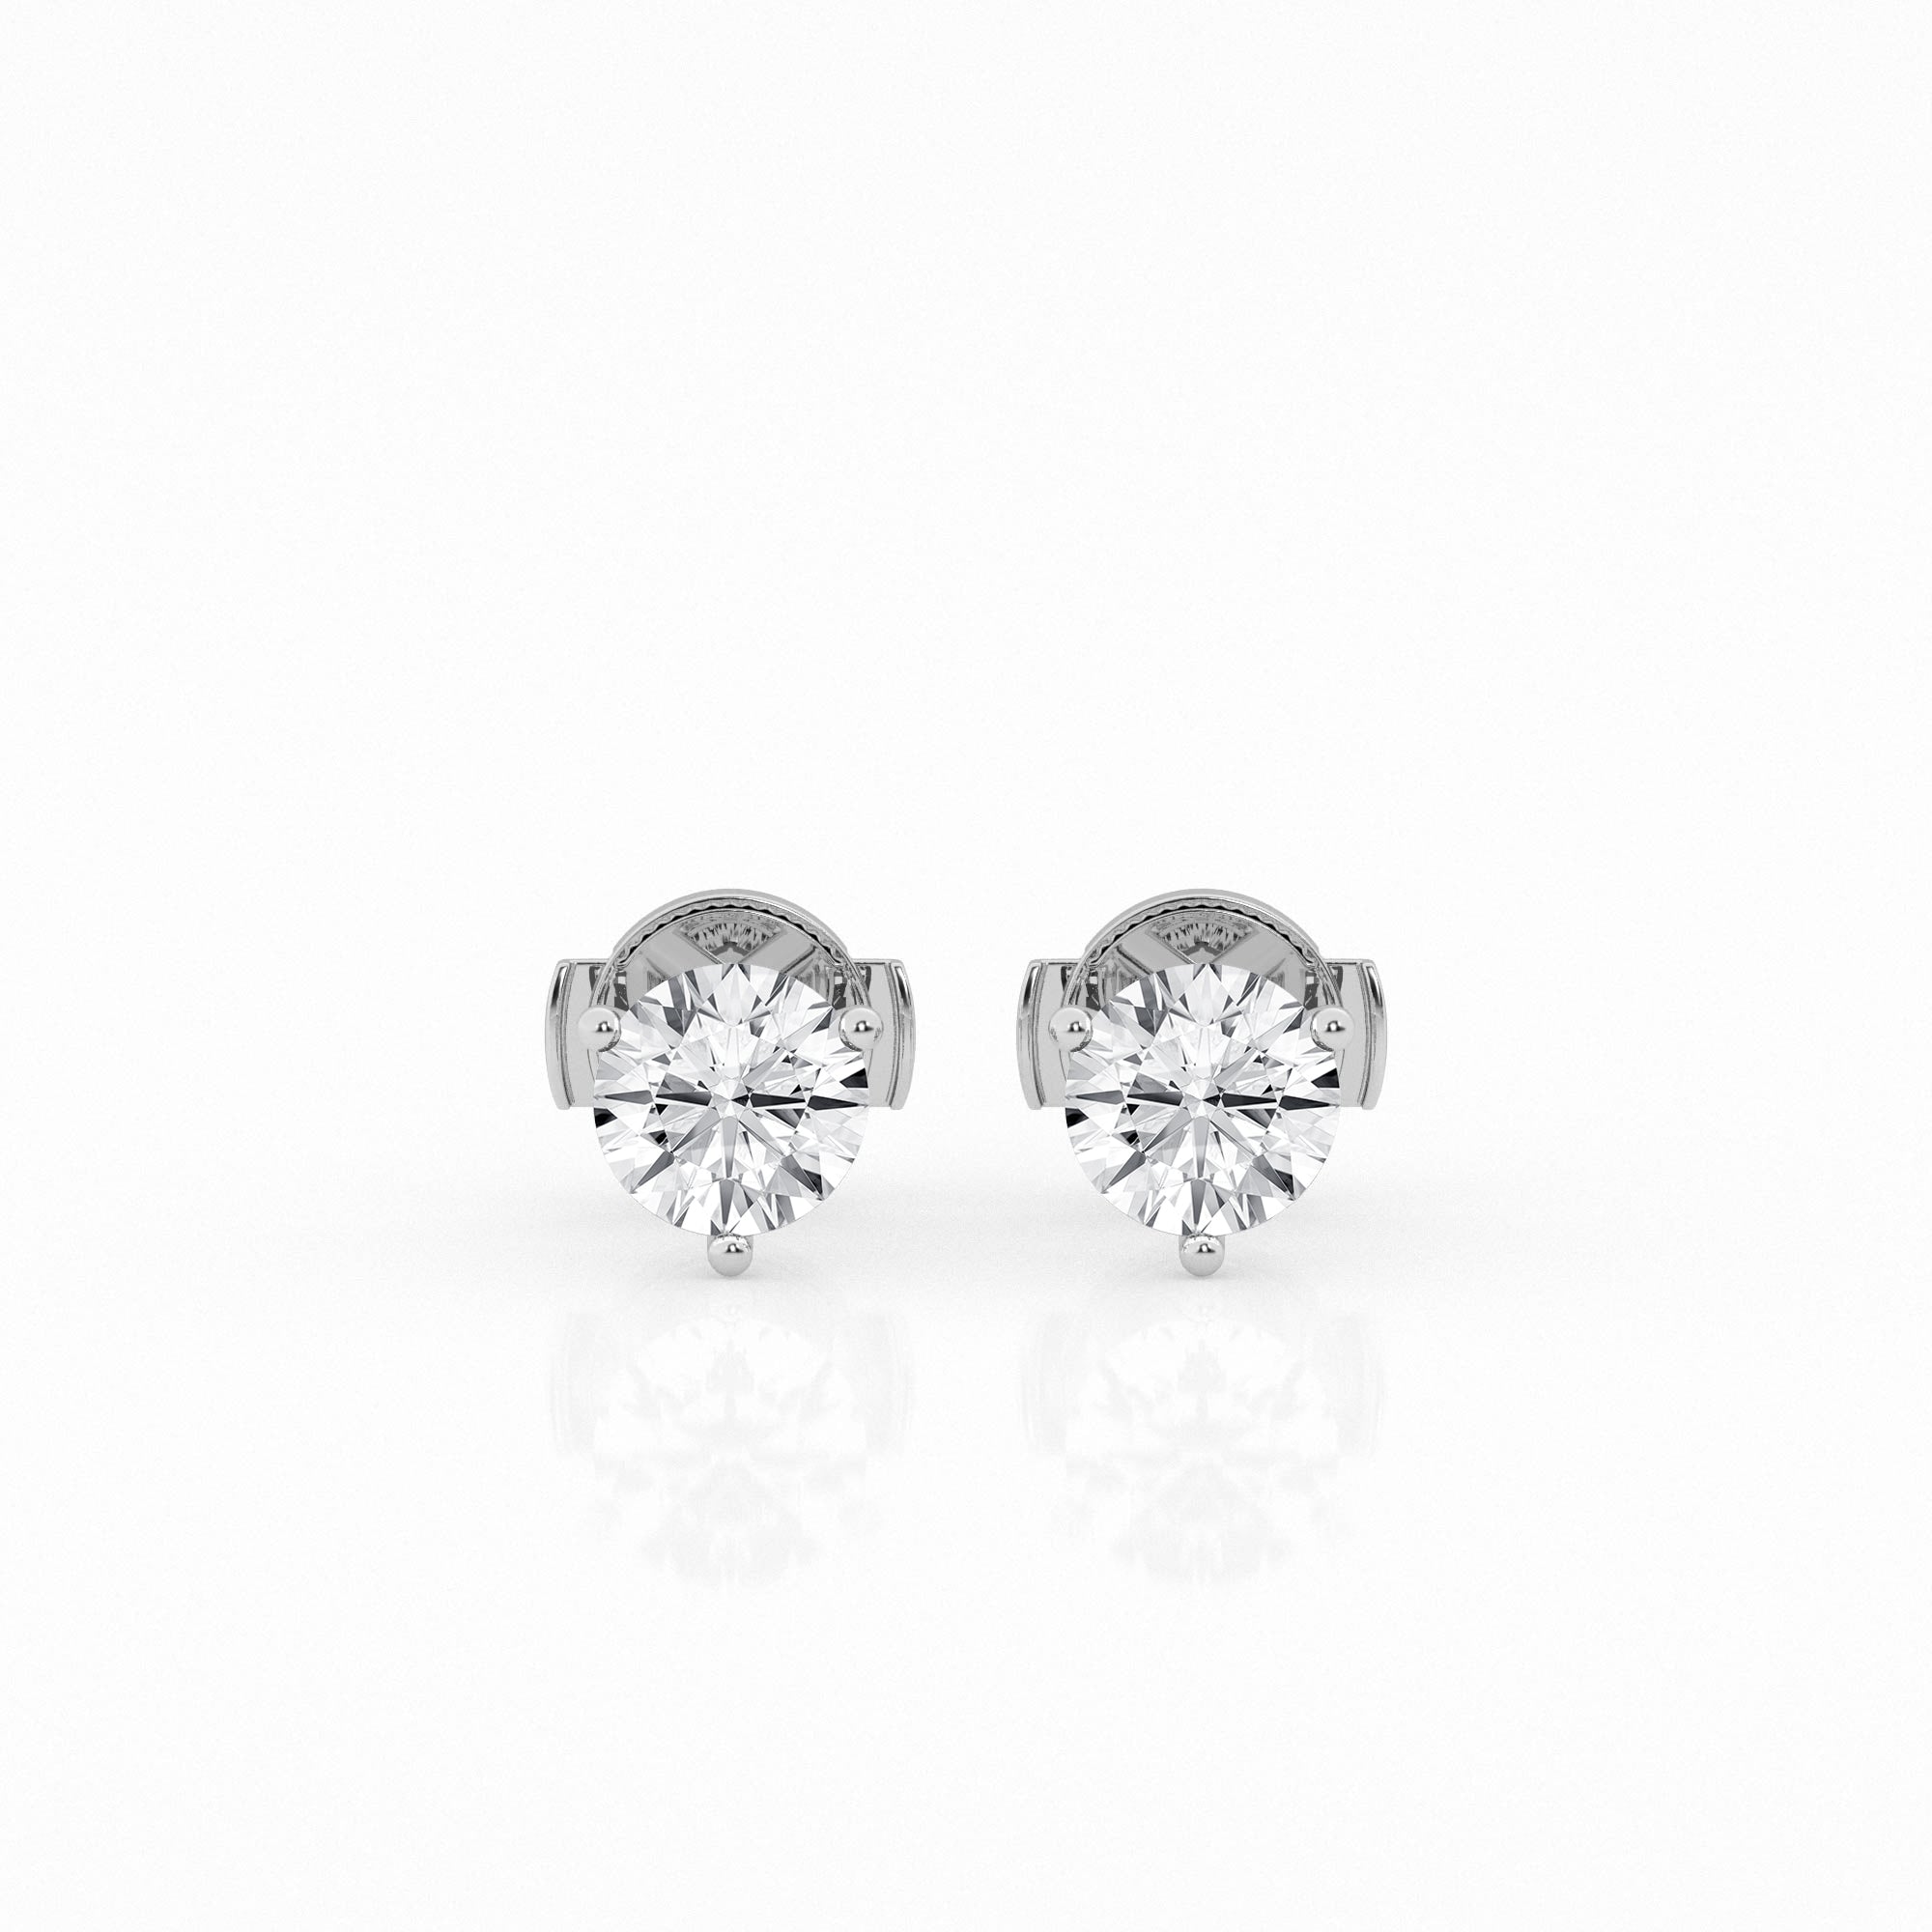 White gold stud earrings featuring 1.5 carat lab-grown round diamonds